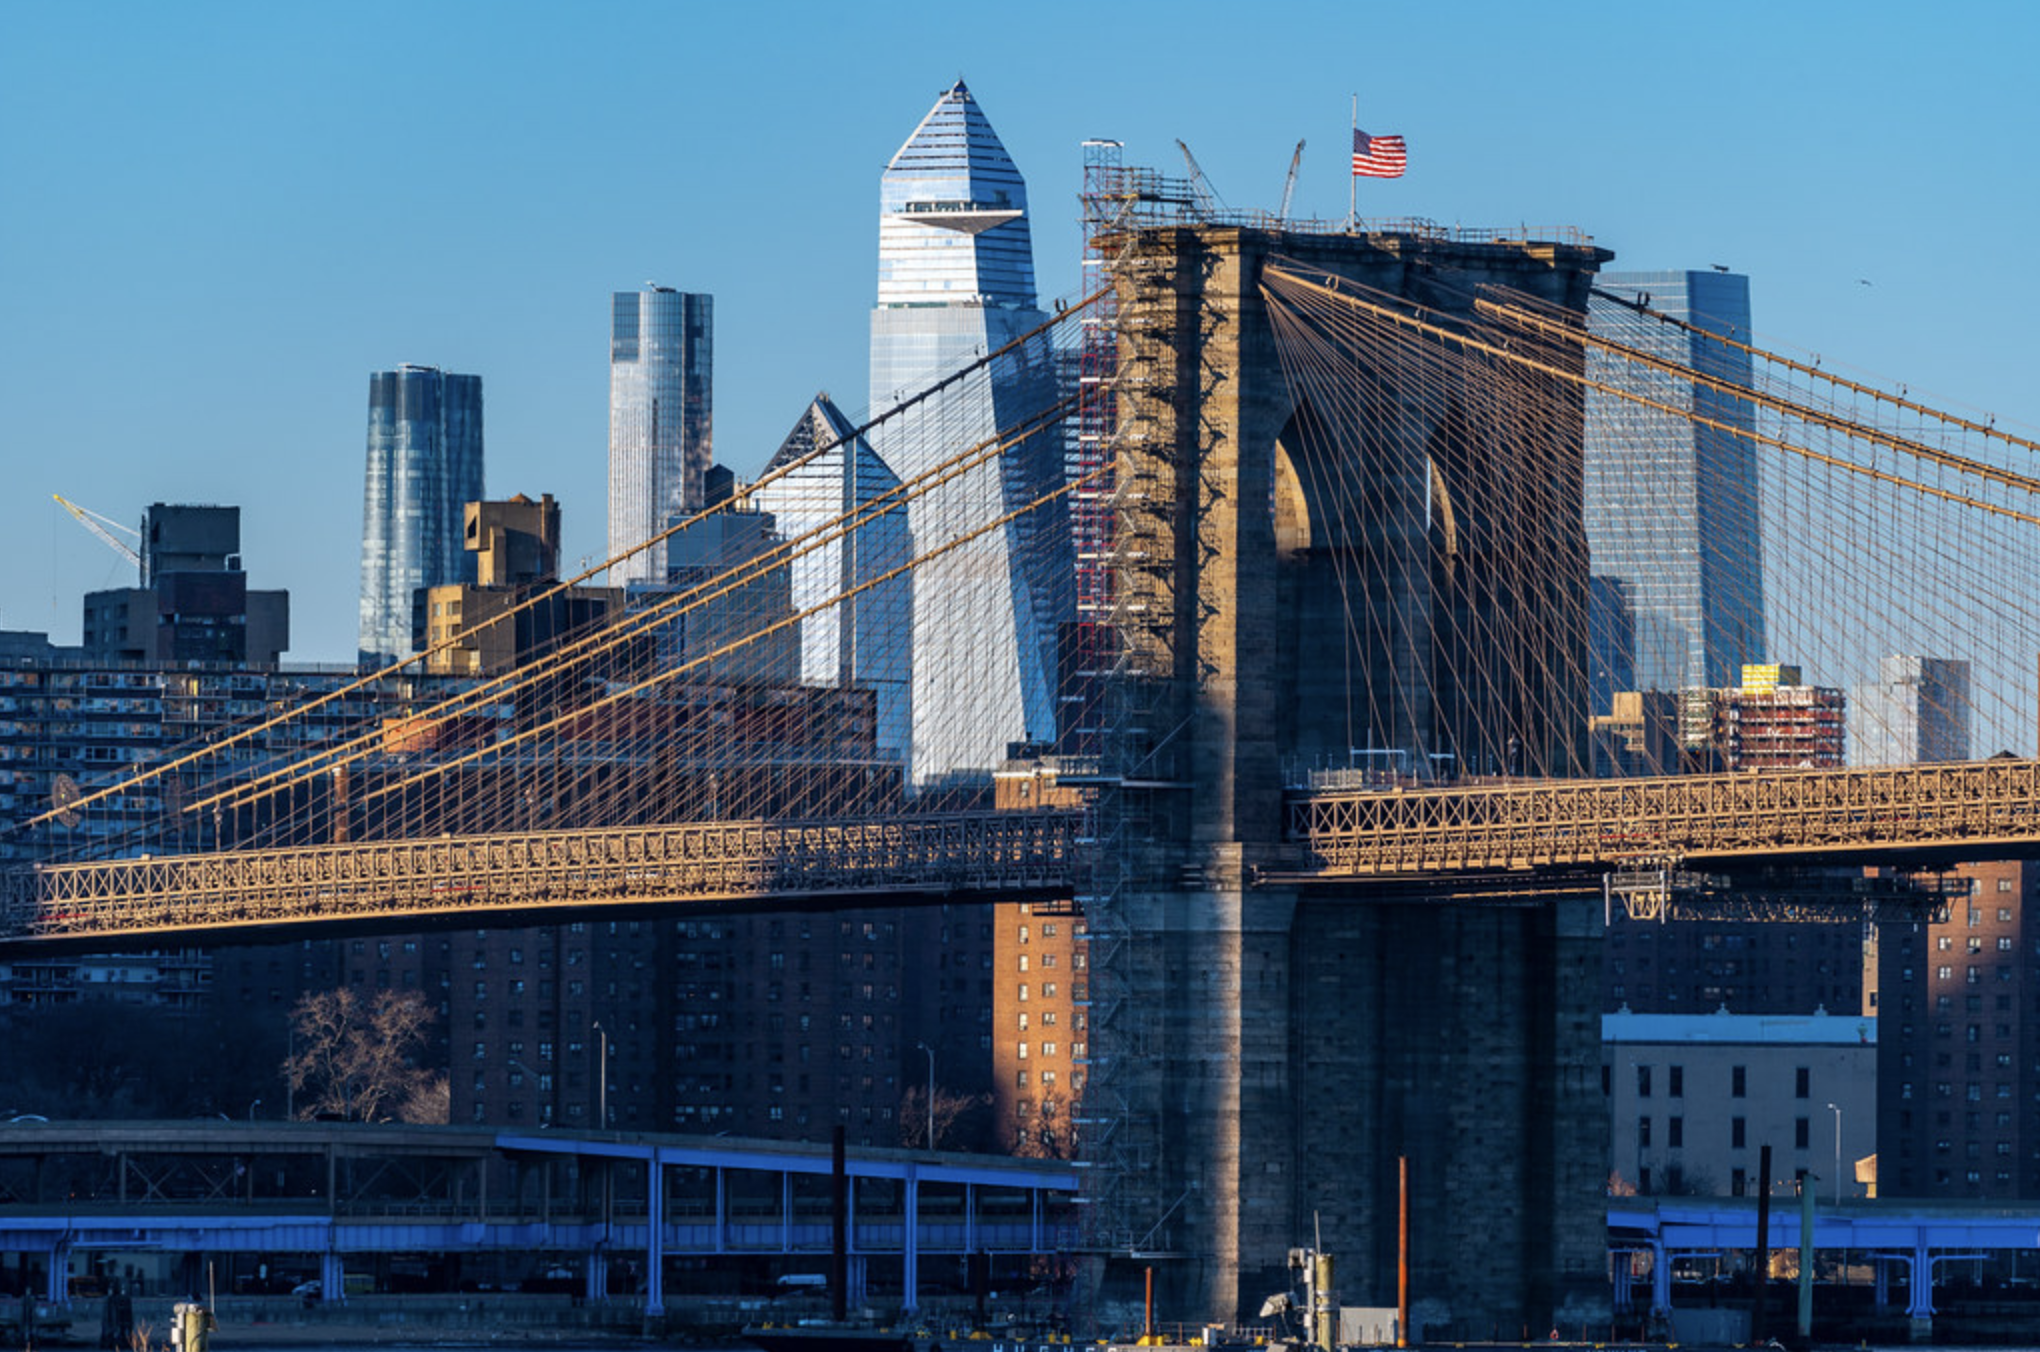 A view of the Brooklyn Bridge with the Manhattan skyline in the background.